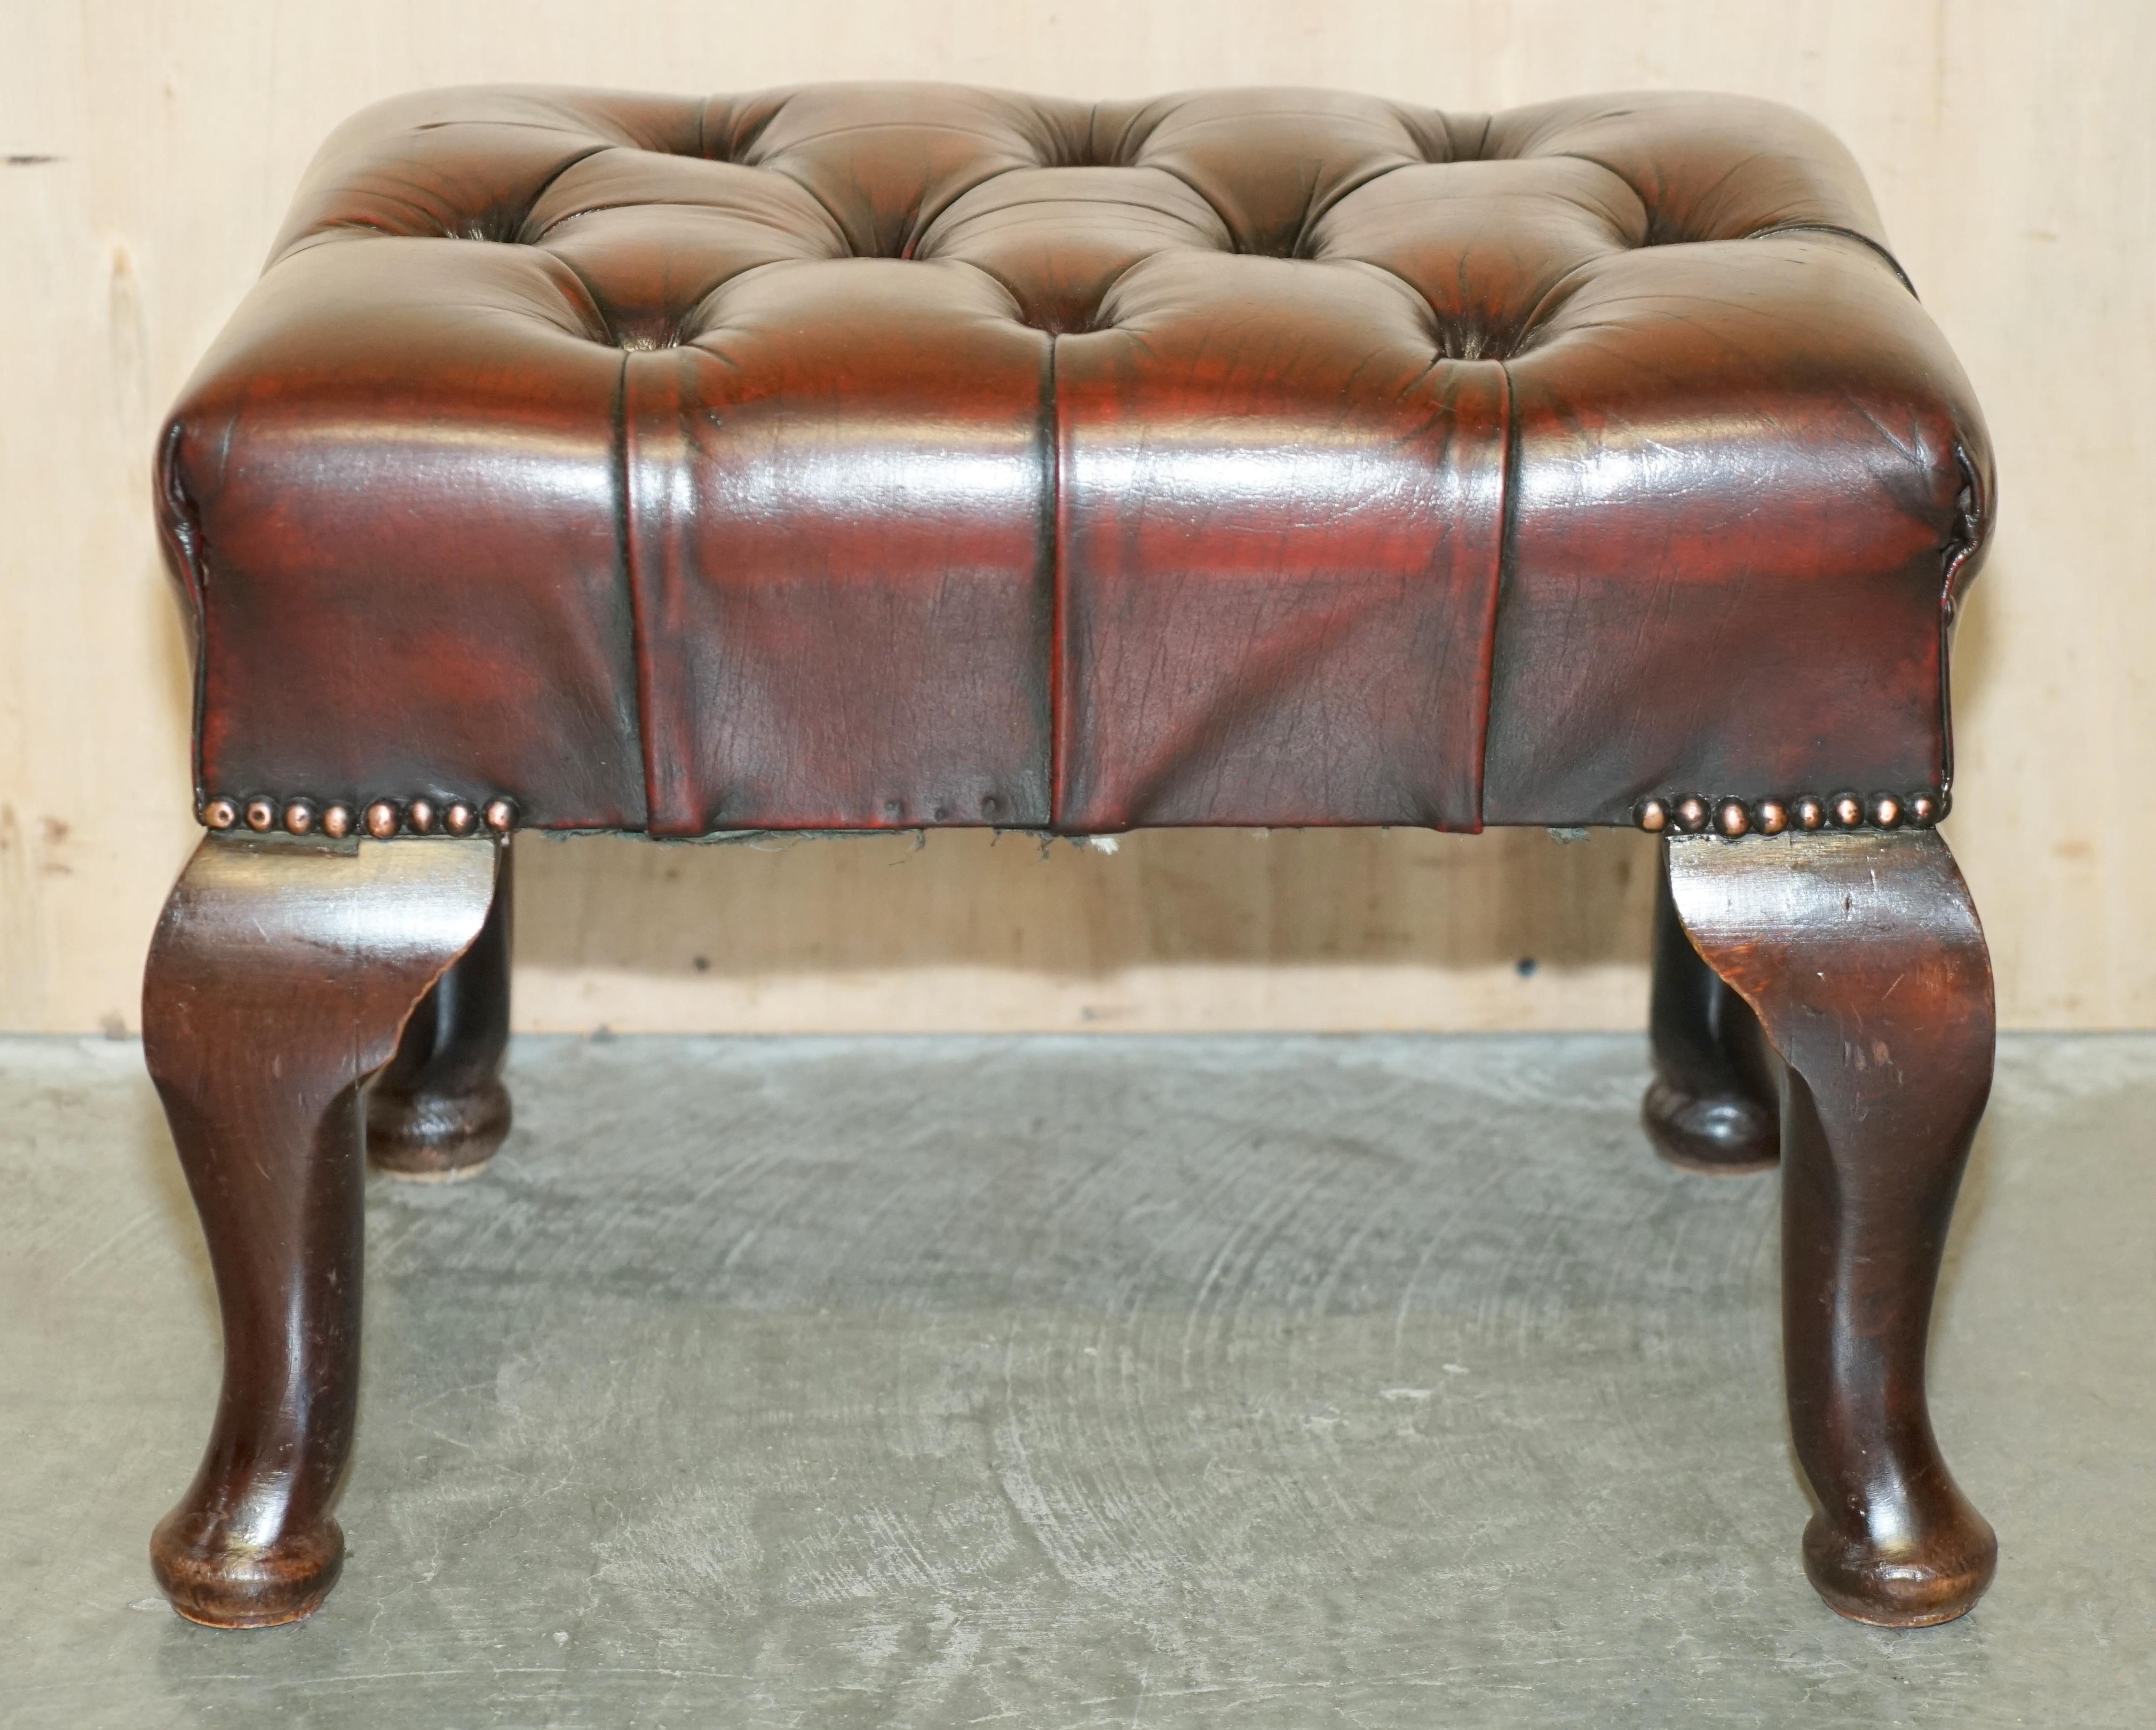 Royal House Antiques

Royal House Antiques is delighted to offer for sale this stunning fully restored hand dyed brown leather vintage Chesterfield footstool 

Please note the delivery fee listed is just a guide, it covers within the M25 only for